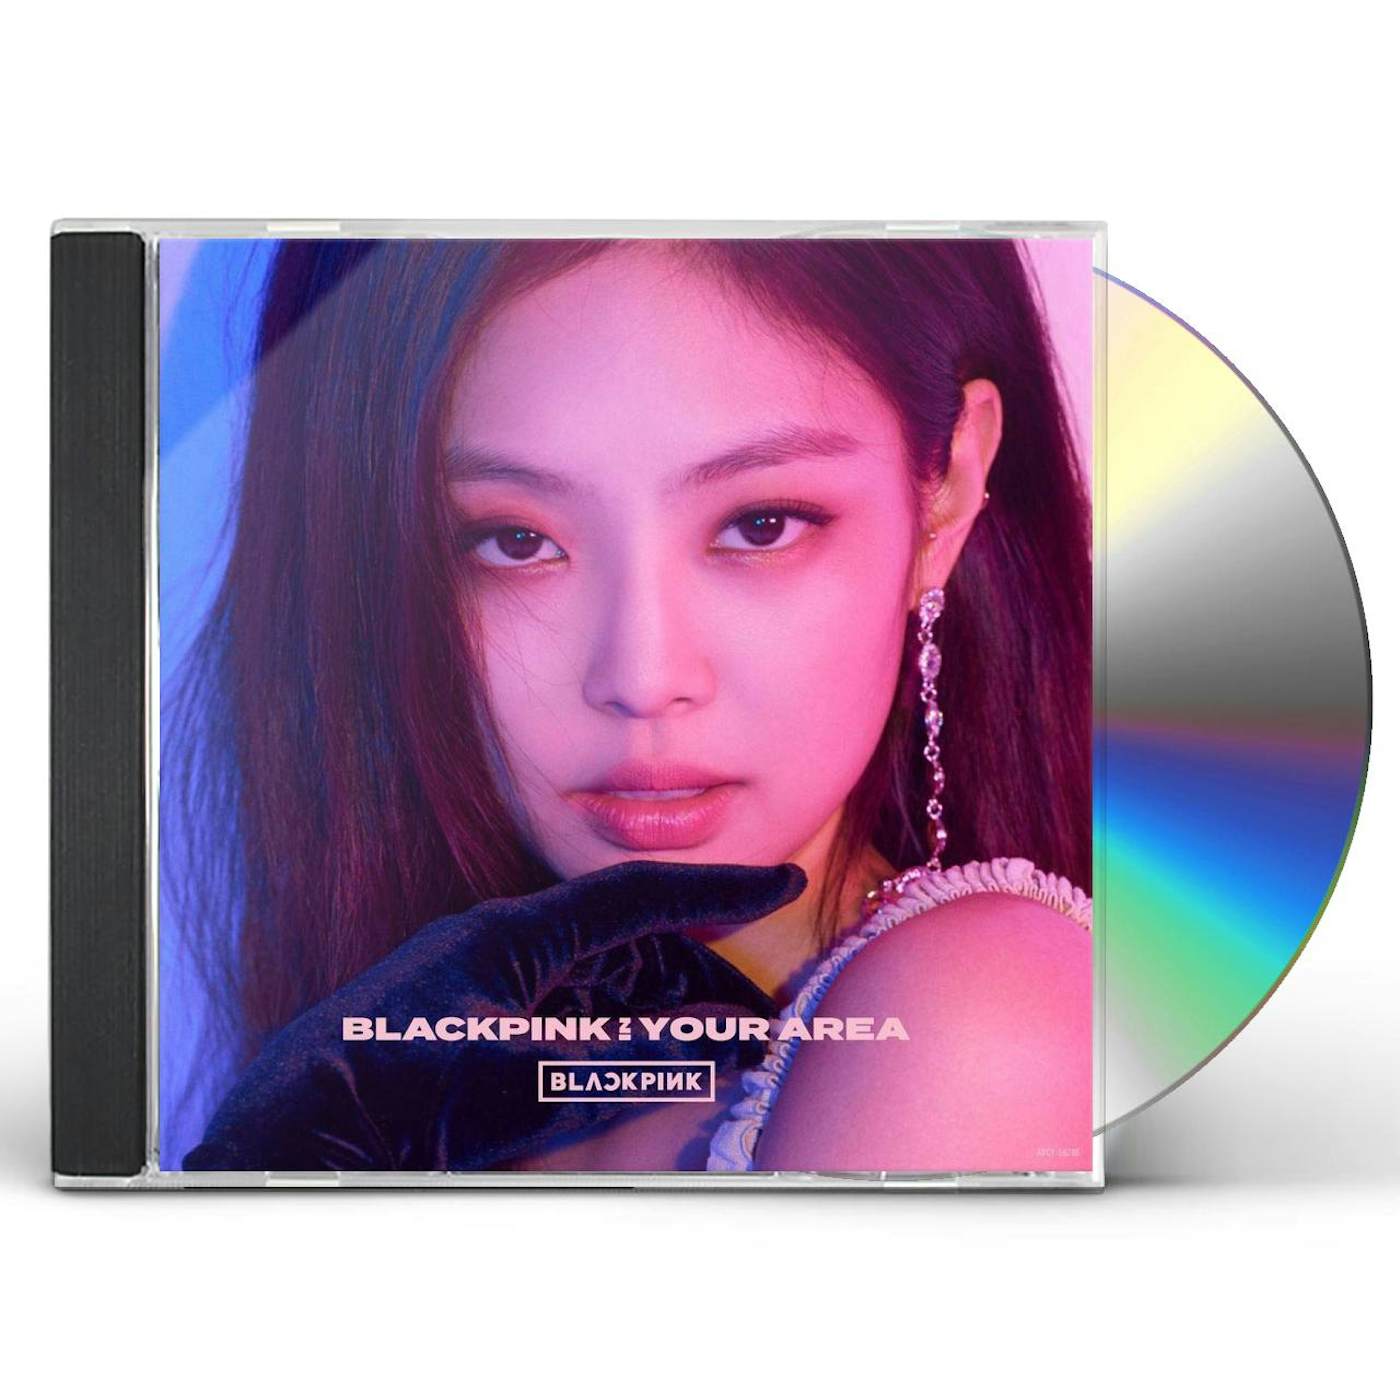 BLACKPINK IN YOUR AREA: JENNIE VERSION CD